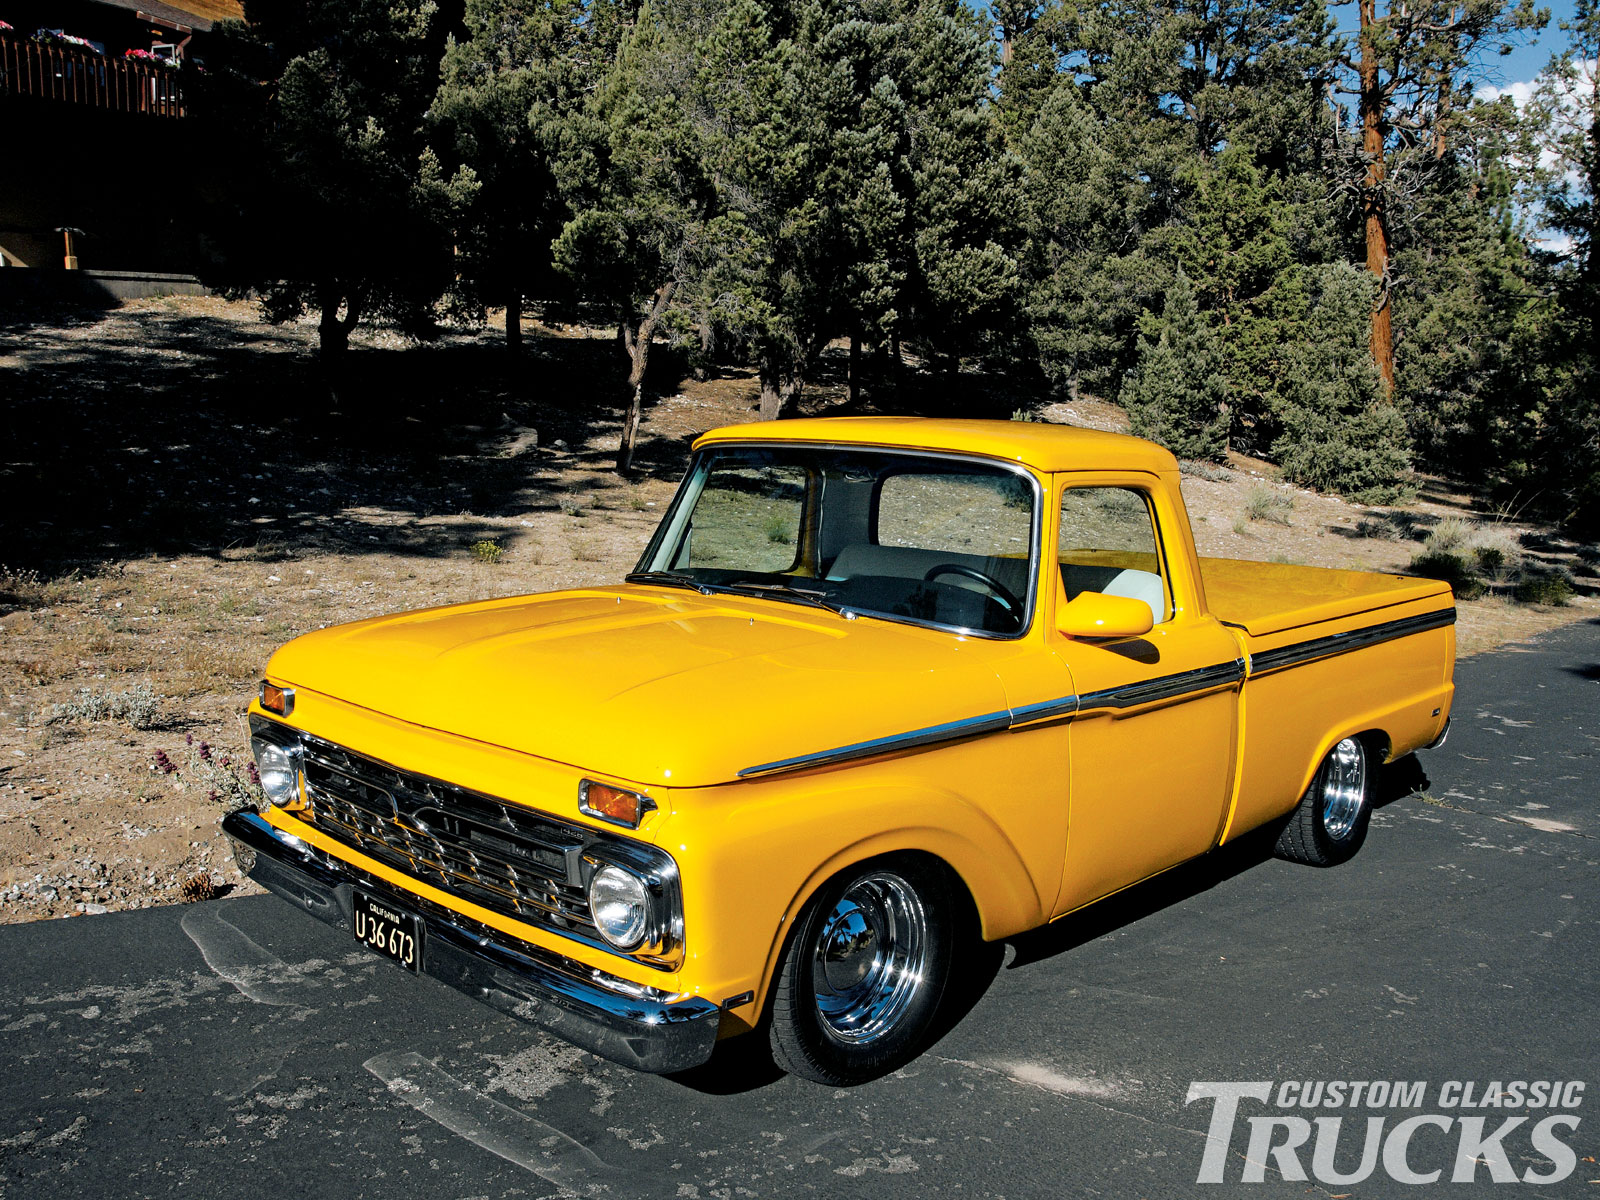 Ford F100 Wallpapers